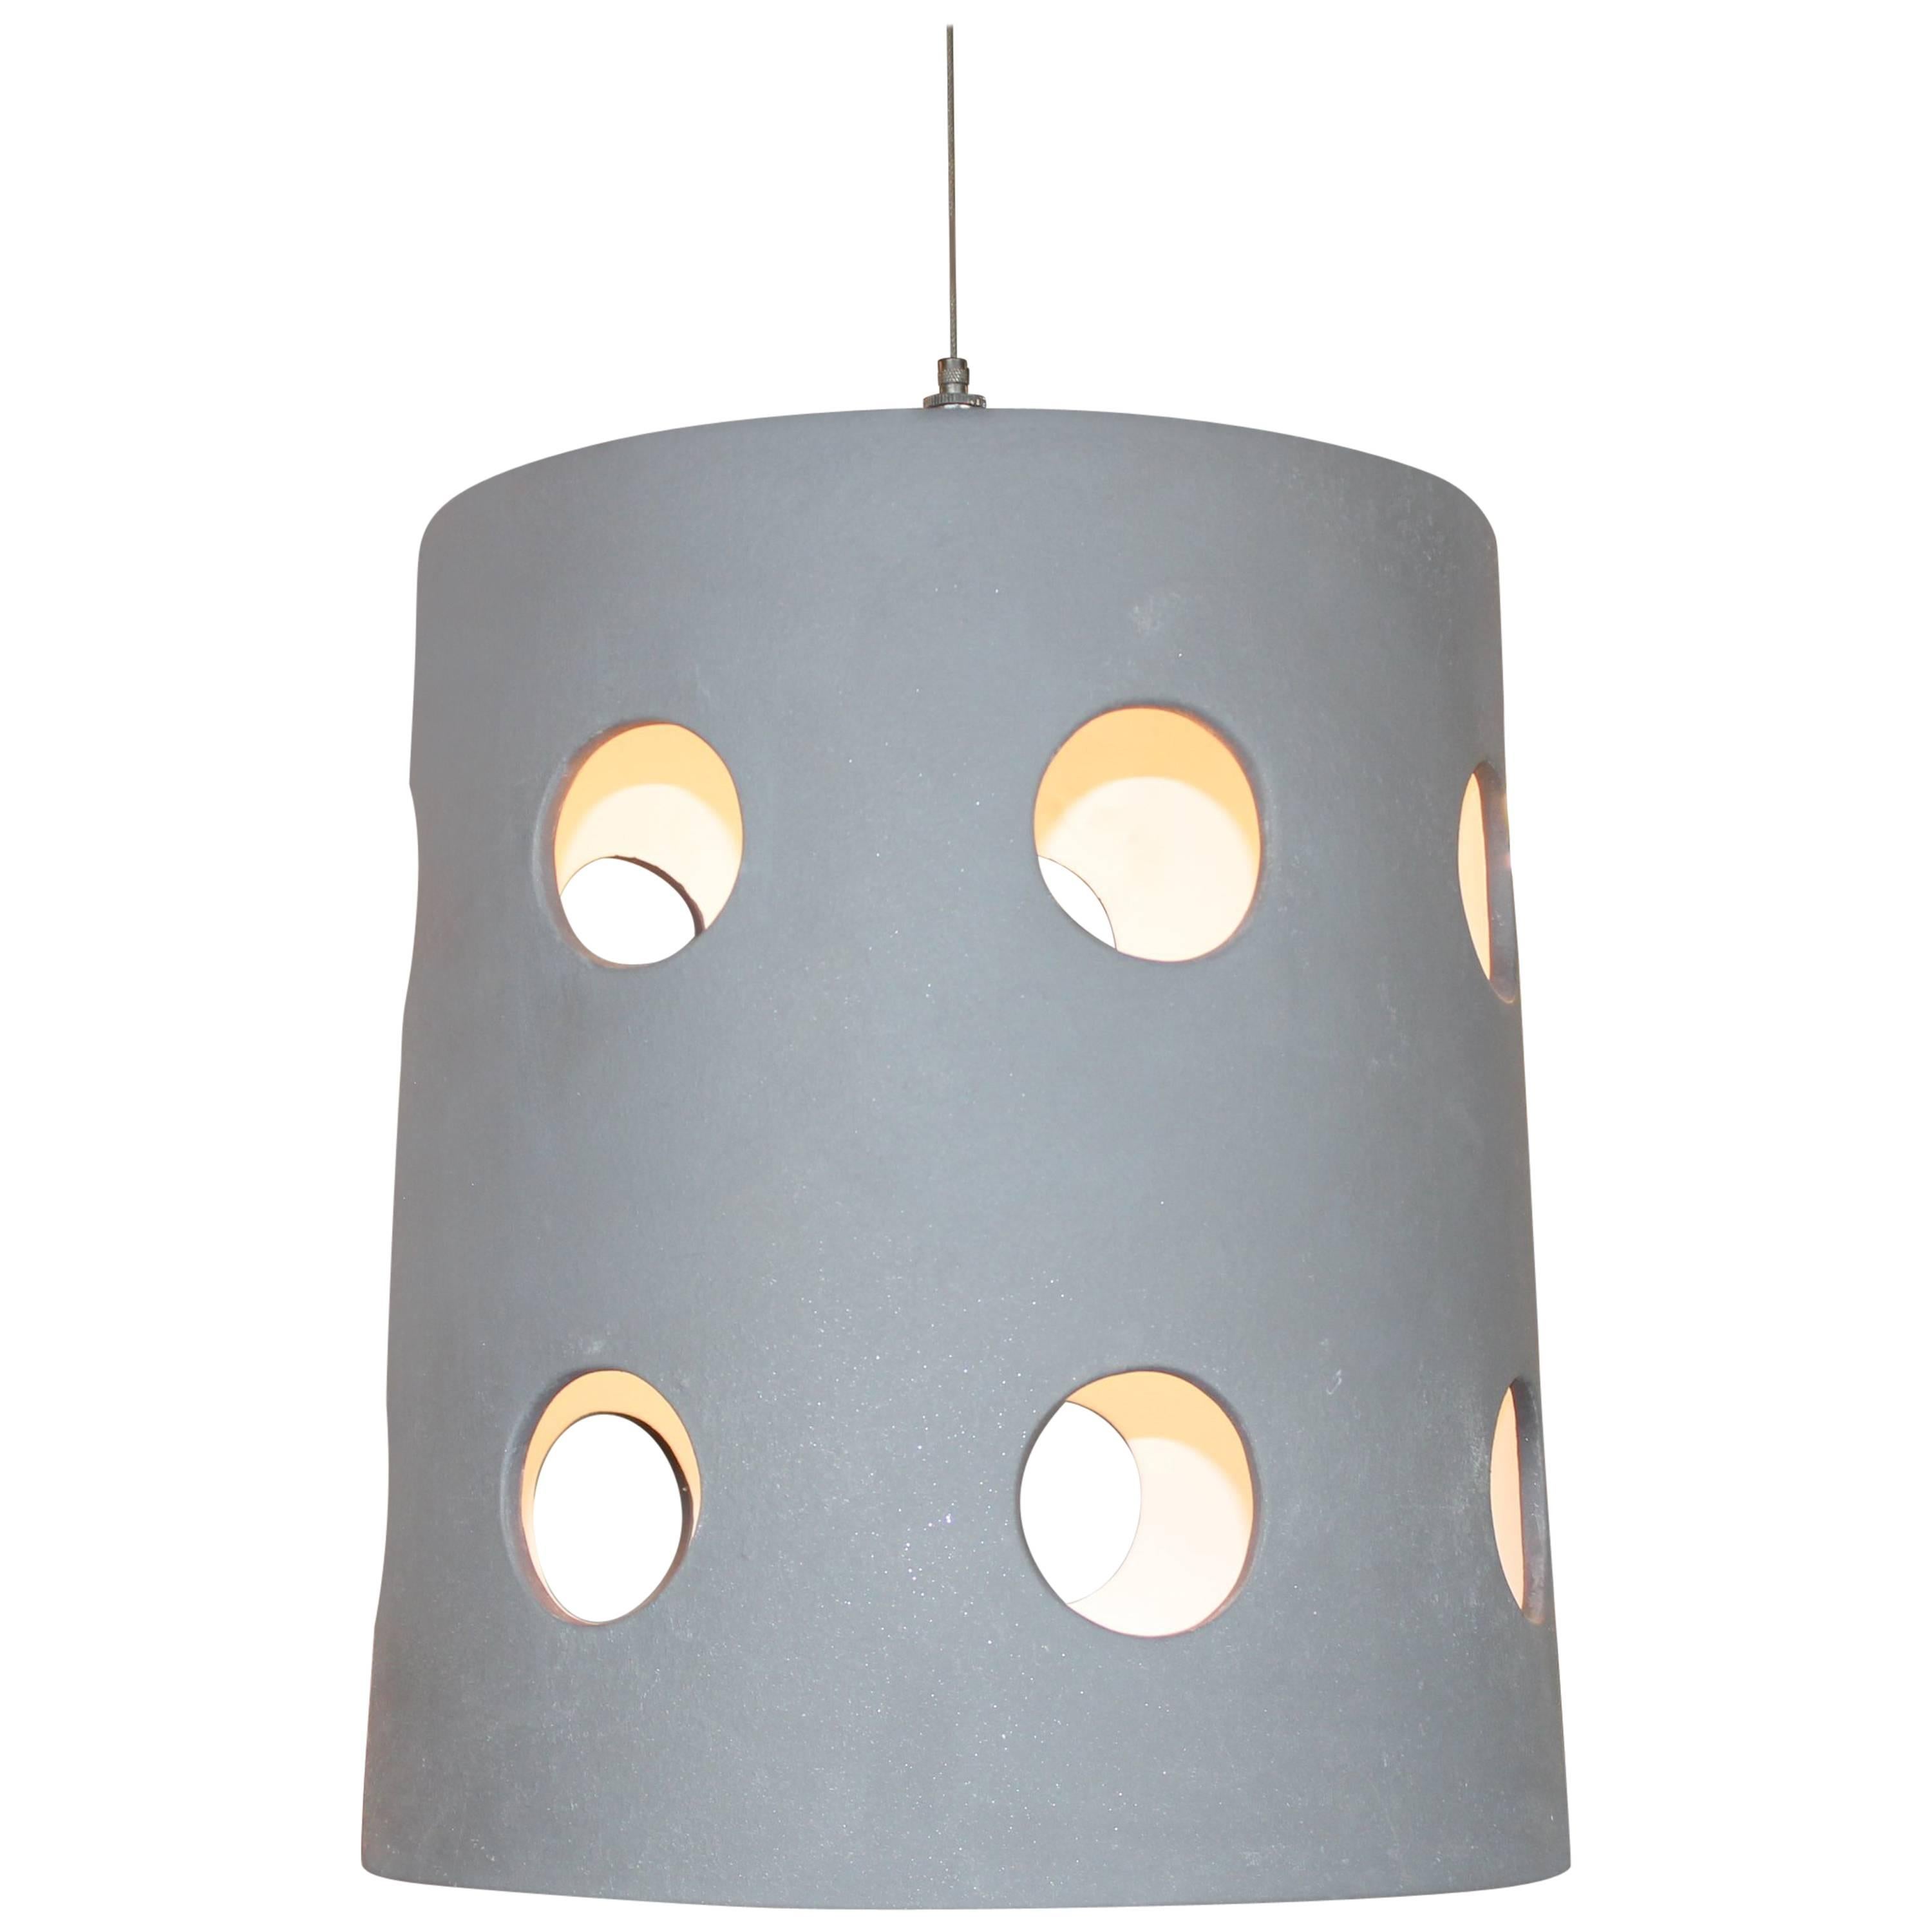 Cylinder Pendant with Circle Cut-Outs Designed by Brendan Bass